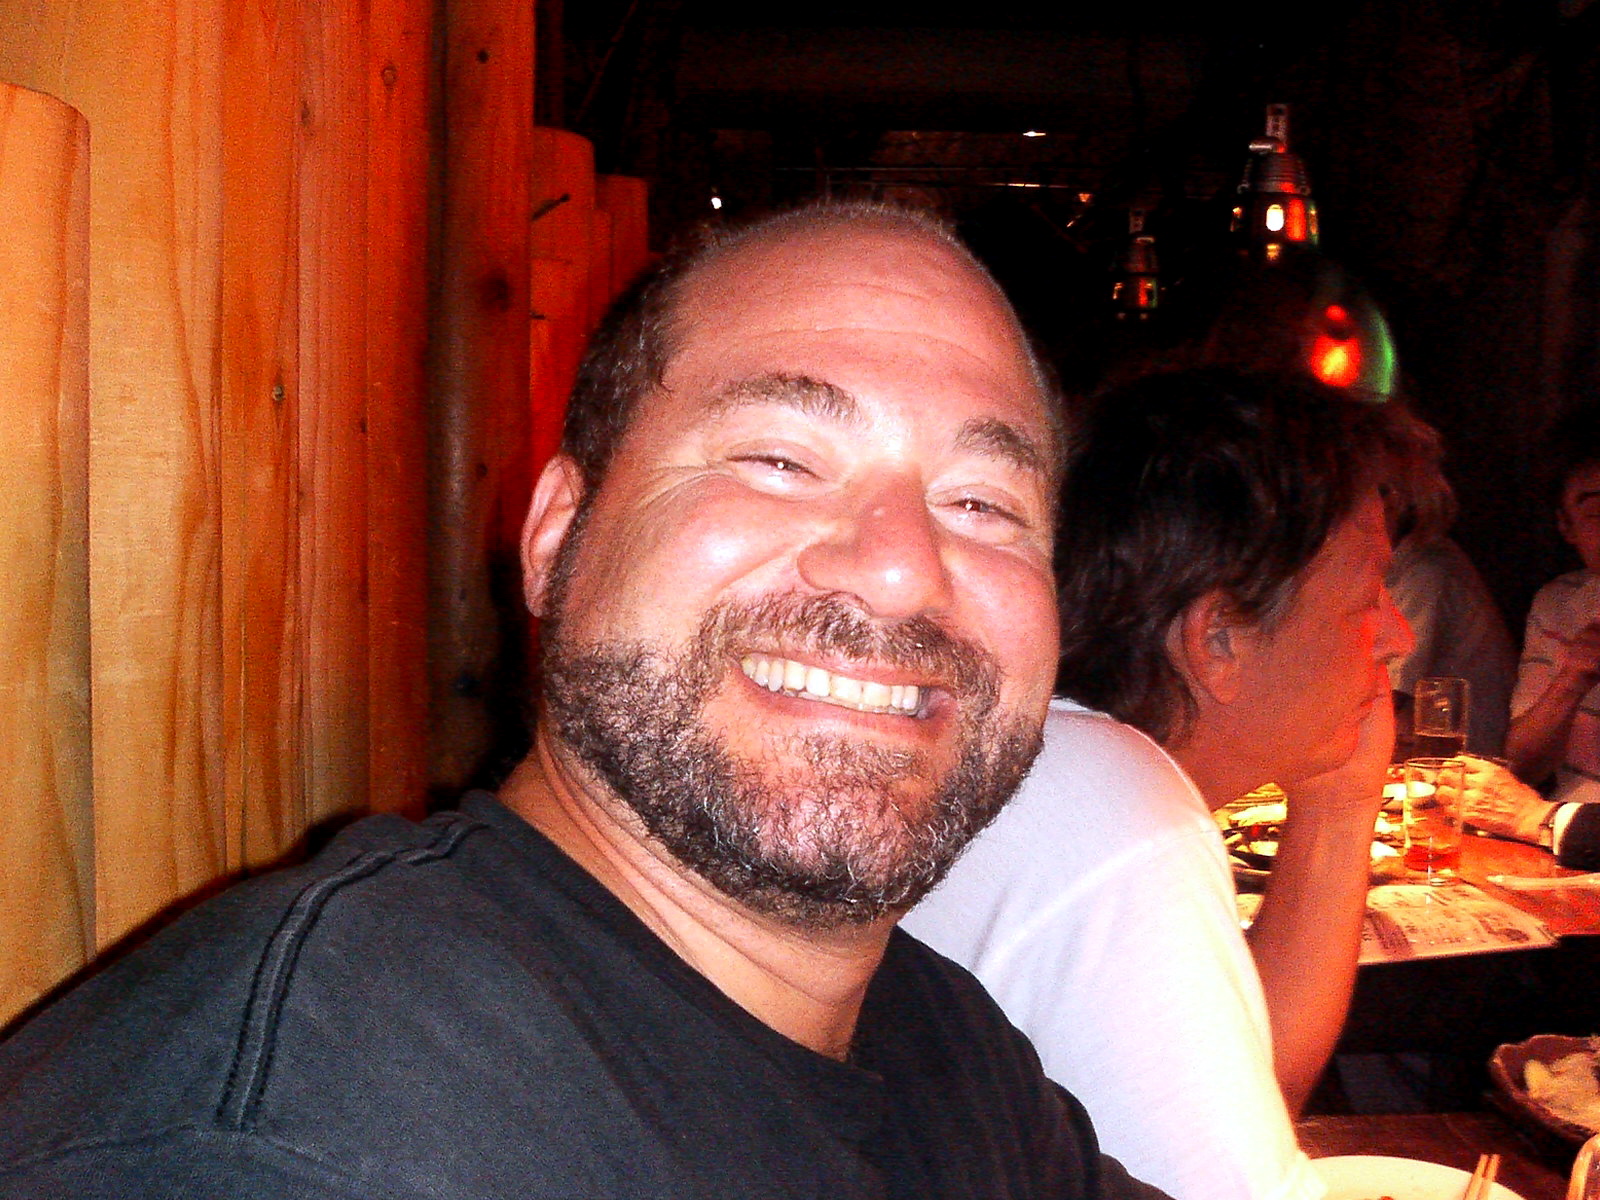 a smiling man with a goatee is sitting in a restaurant